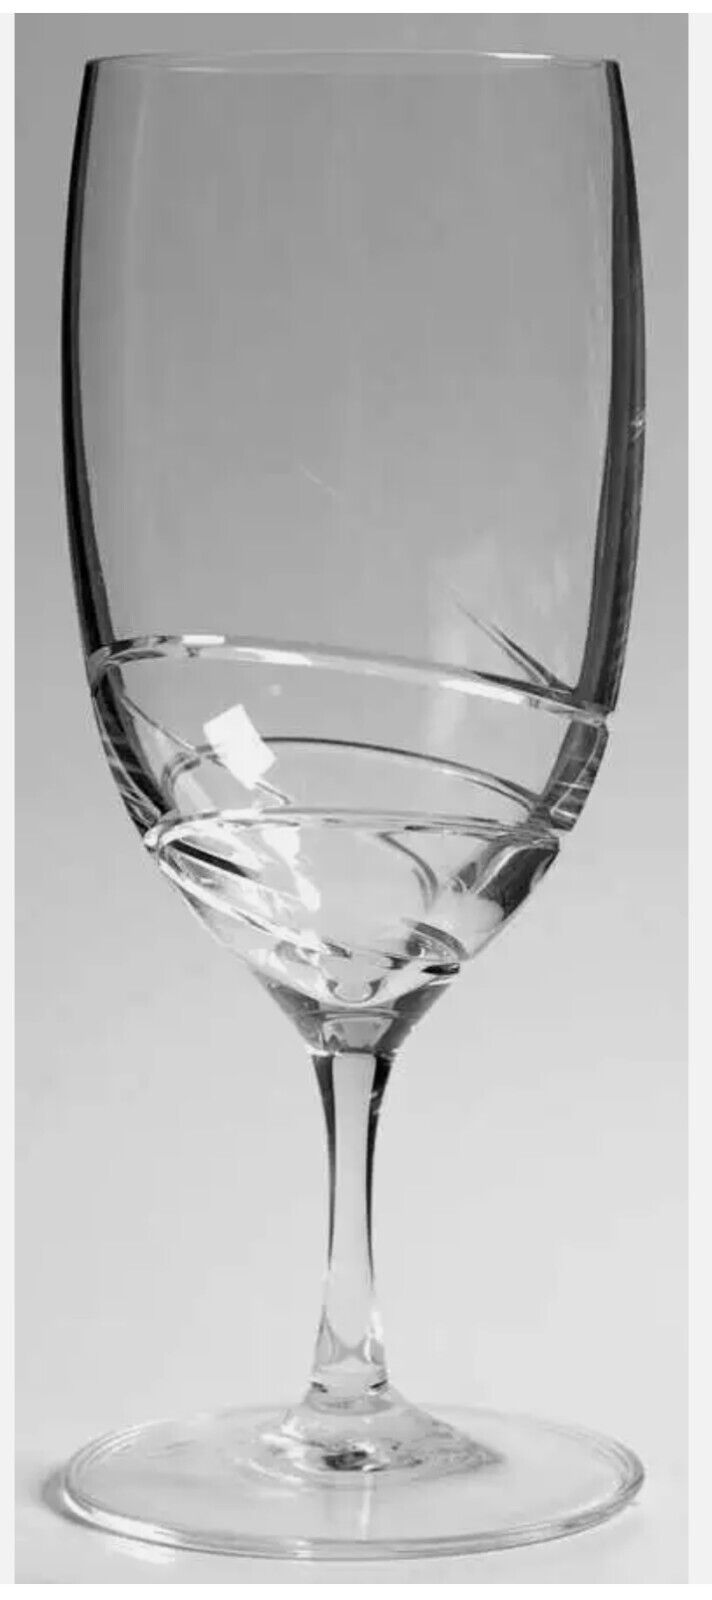 Waterford Crystal Ballet Ribbon Iced Tea Glass, Set of 2